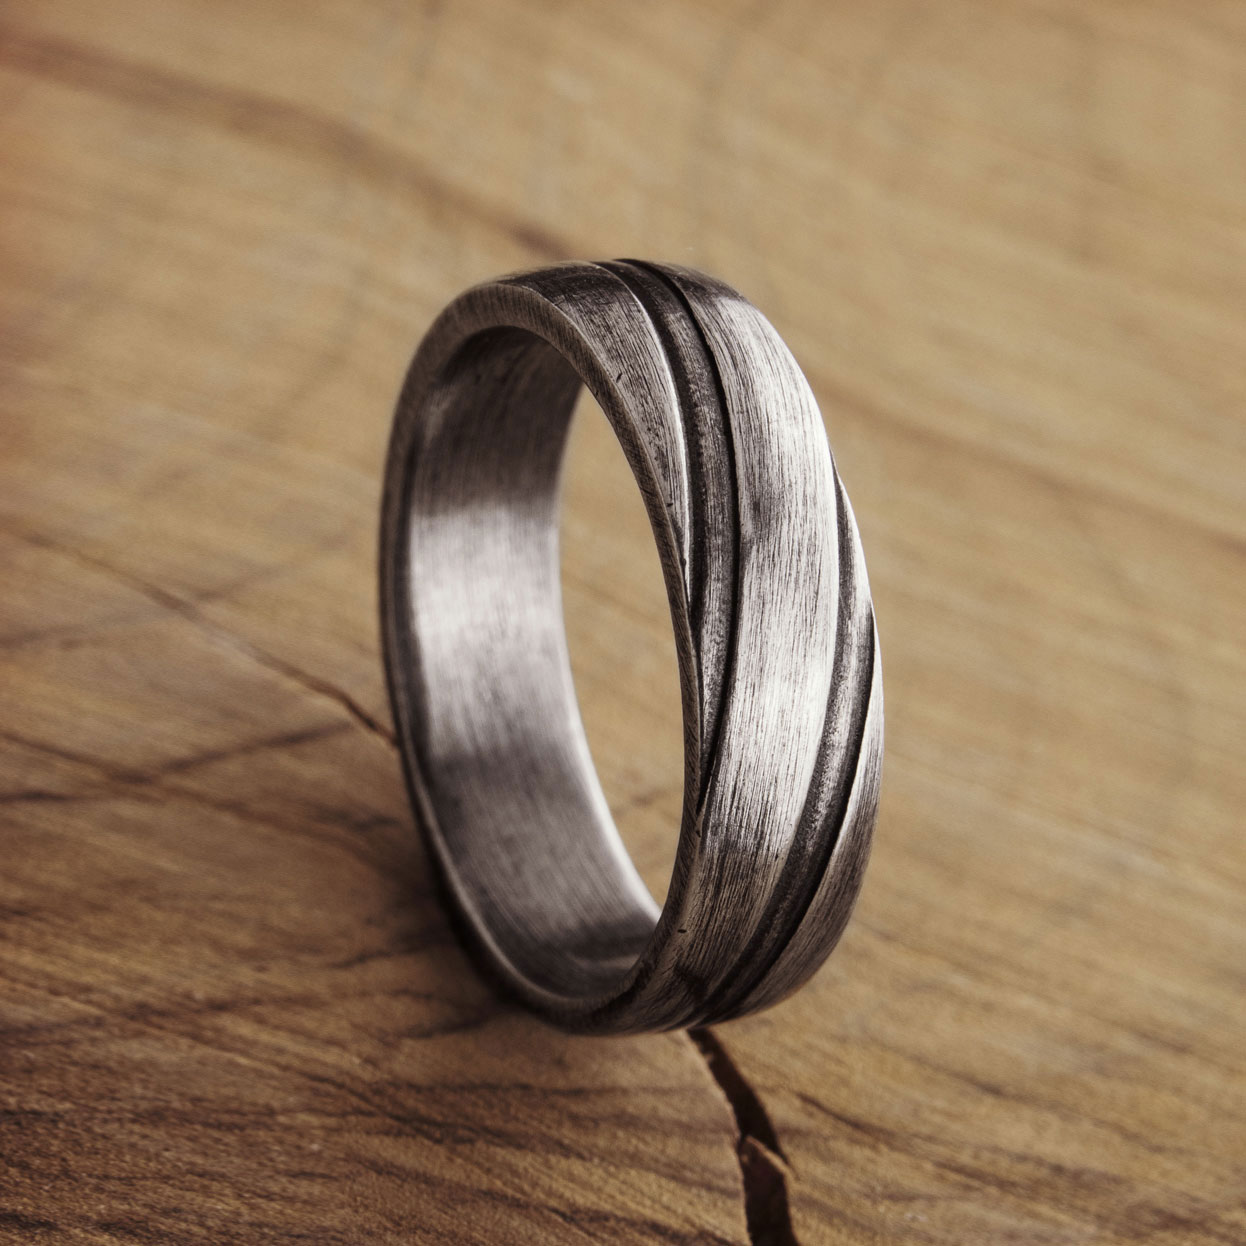 Oxidised Silver Oxidized Metal Finger Ring